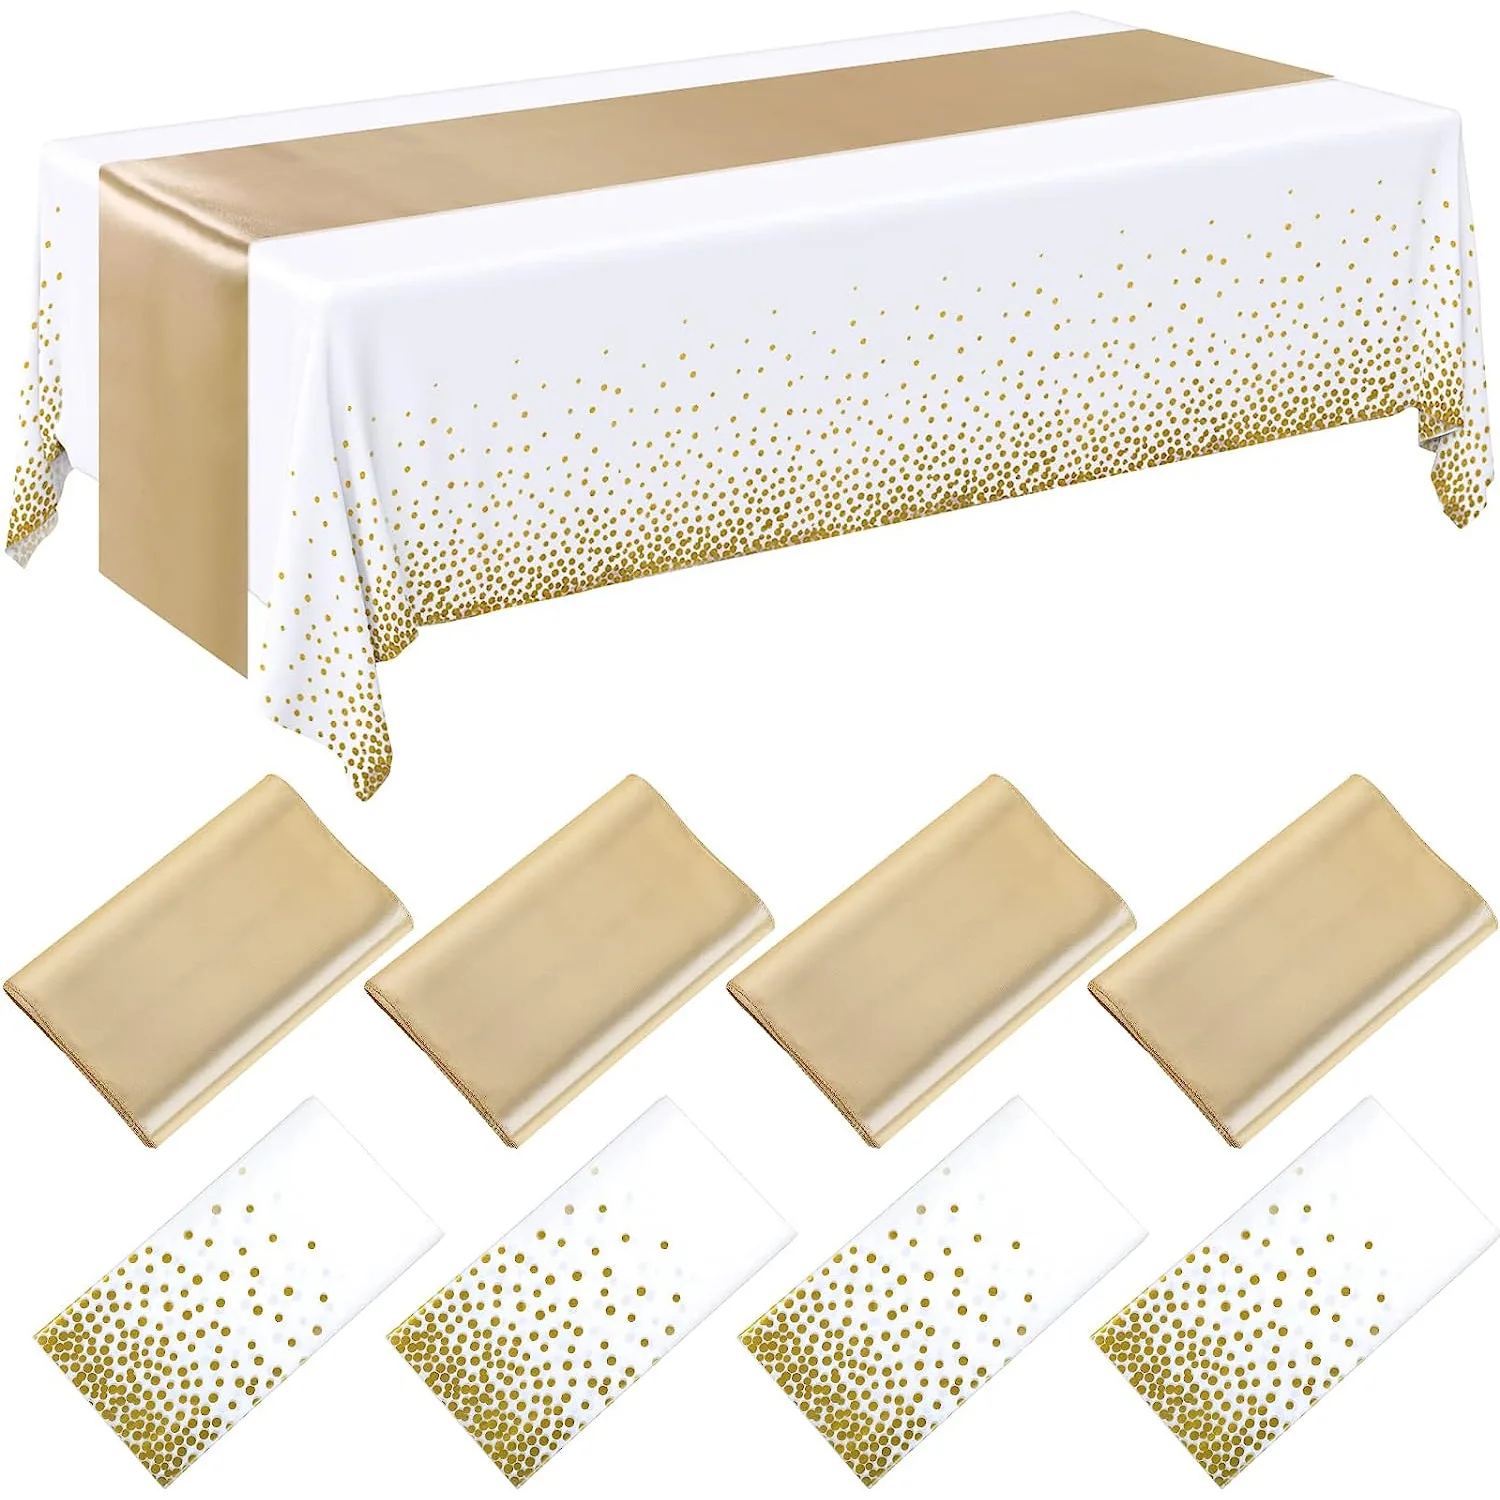 

4 sets Disposable rectangle plastic tablecloth waterproof table cover gold table runner for party banquet Decor 54x108inch